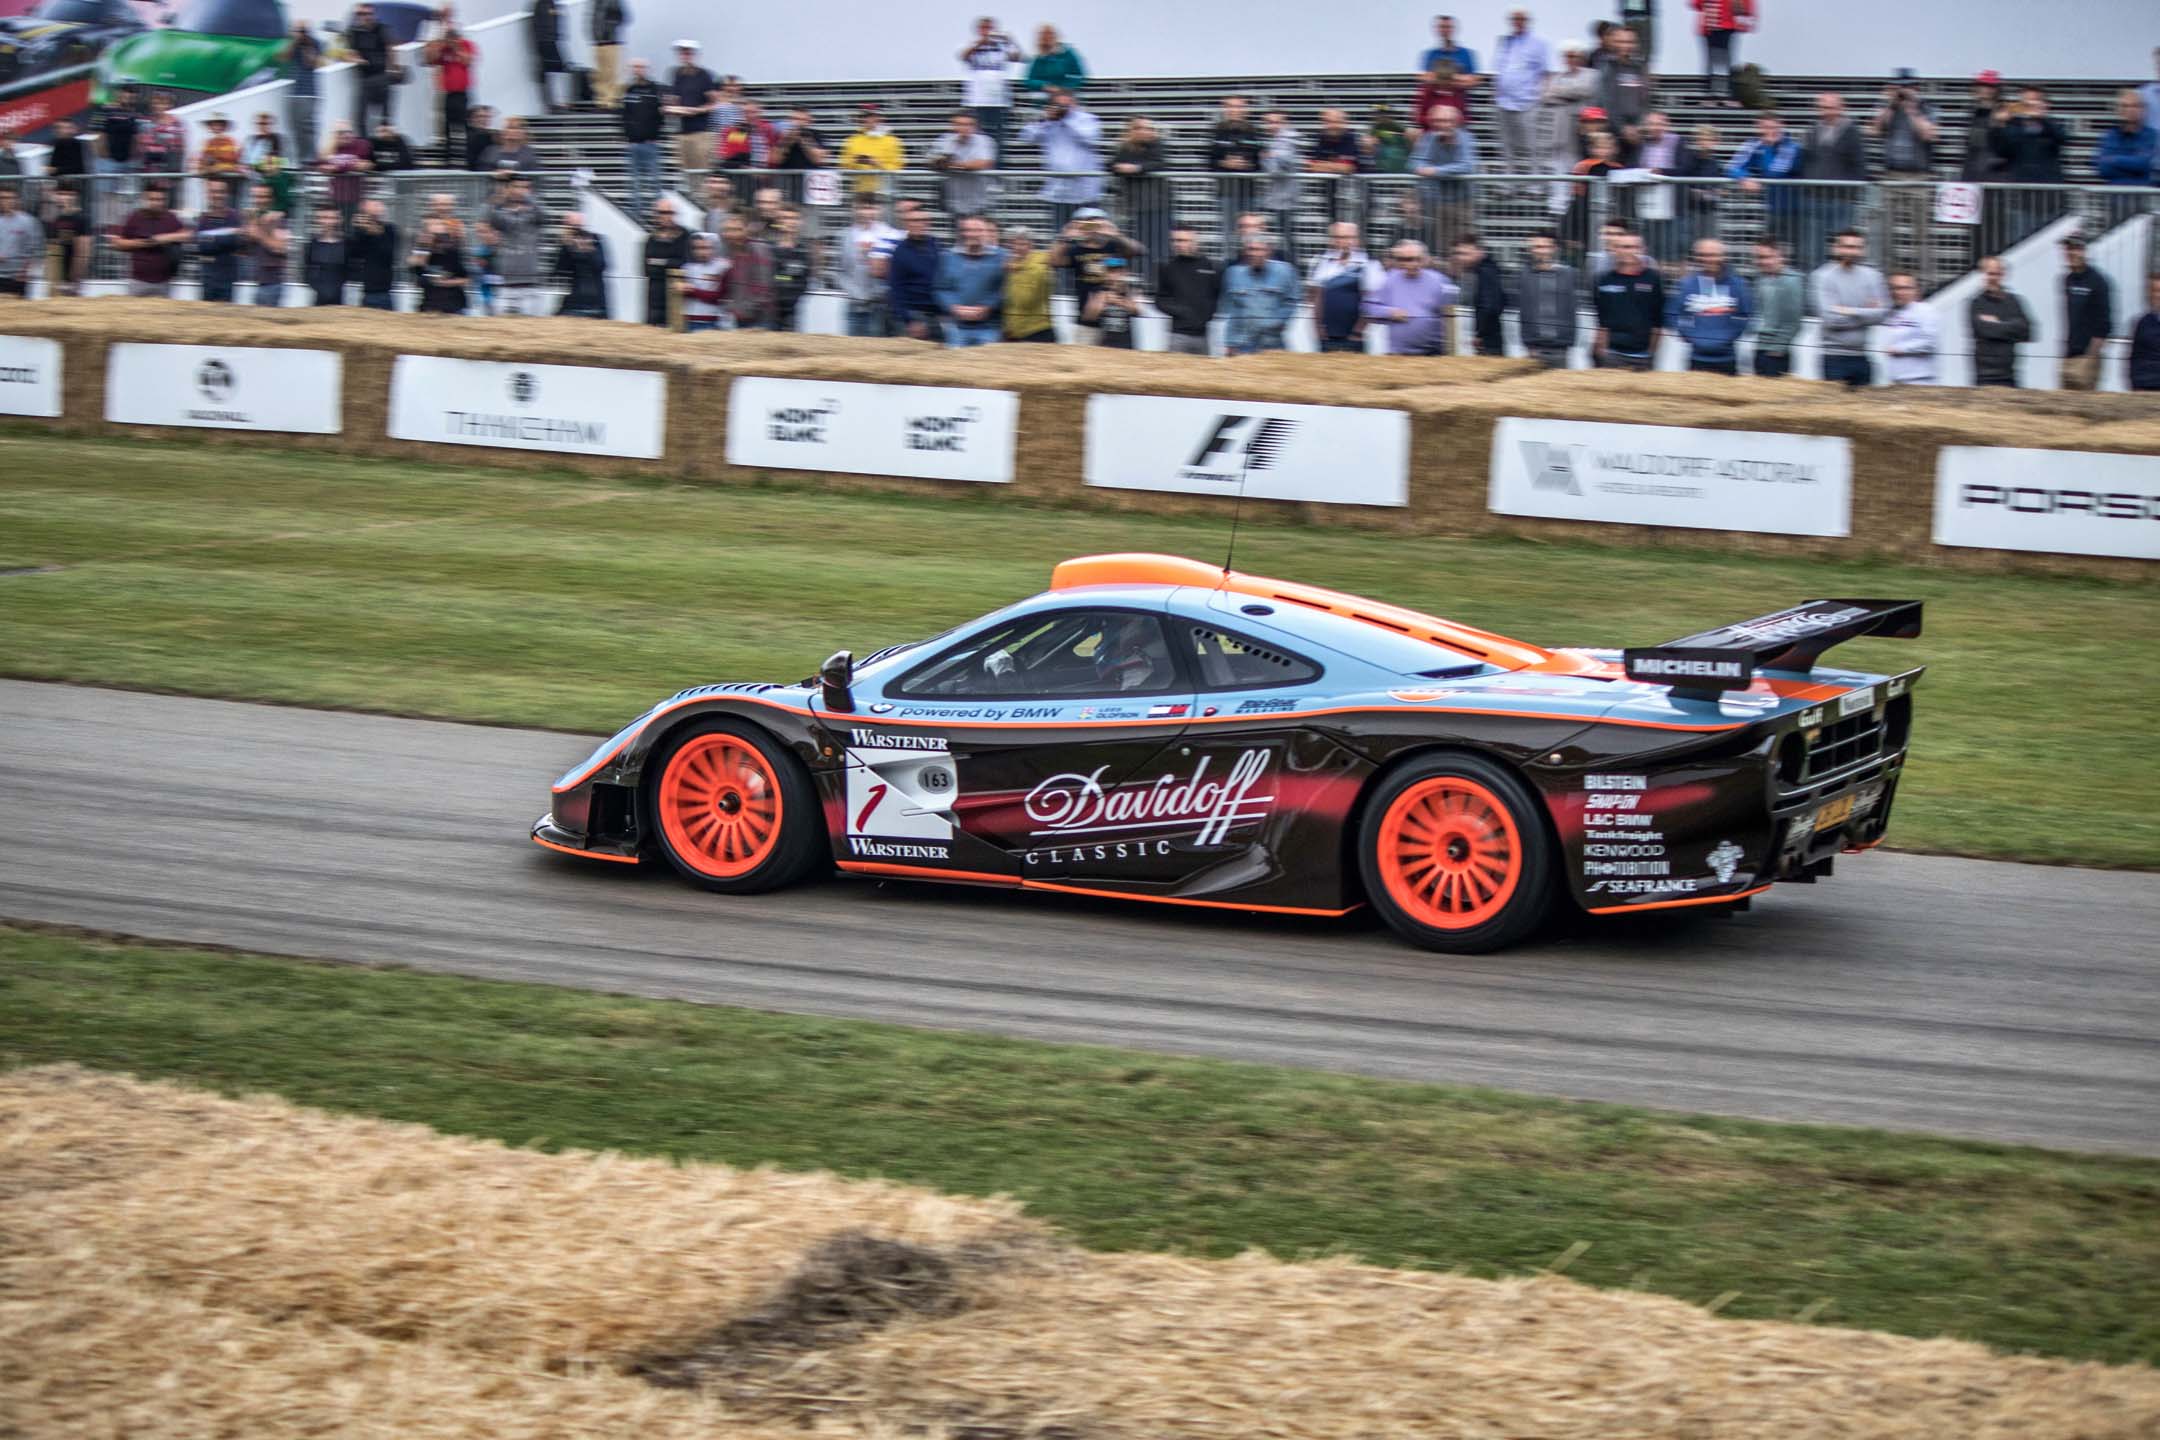 Here’s one: the McLaren F1 GTR longtail. The McLaren F1, also turning 25 this year, is perhaps the purest road-going supercar ever built. This is the racing evolution of the breed, as competed at Le Mans in 1997.